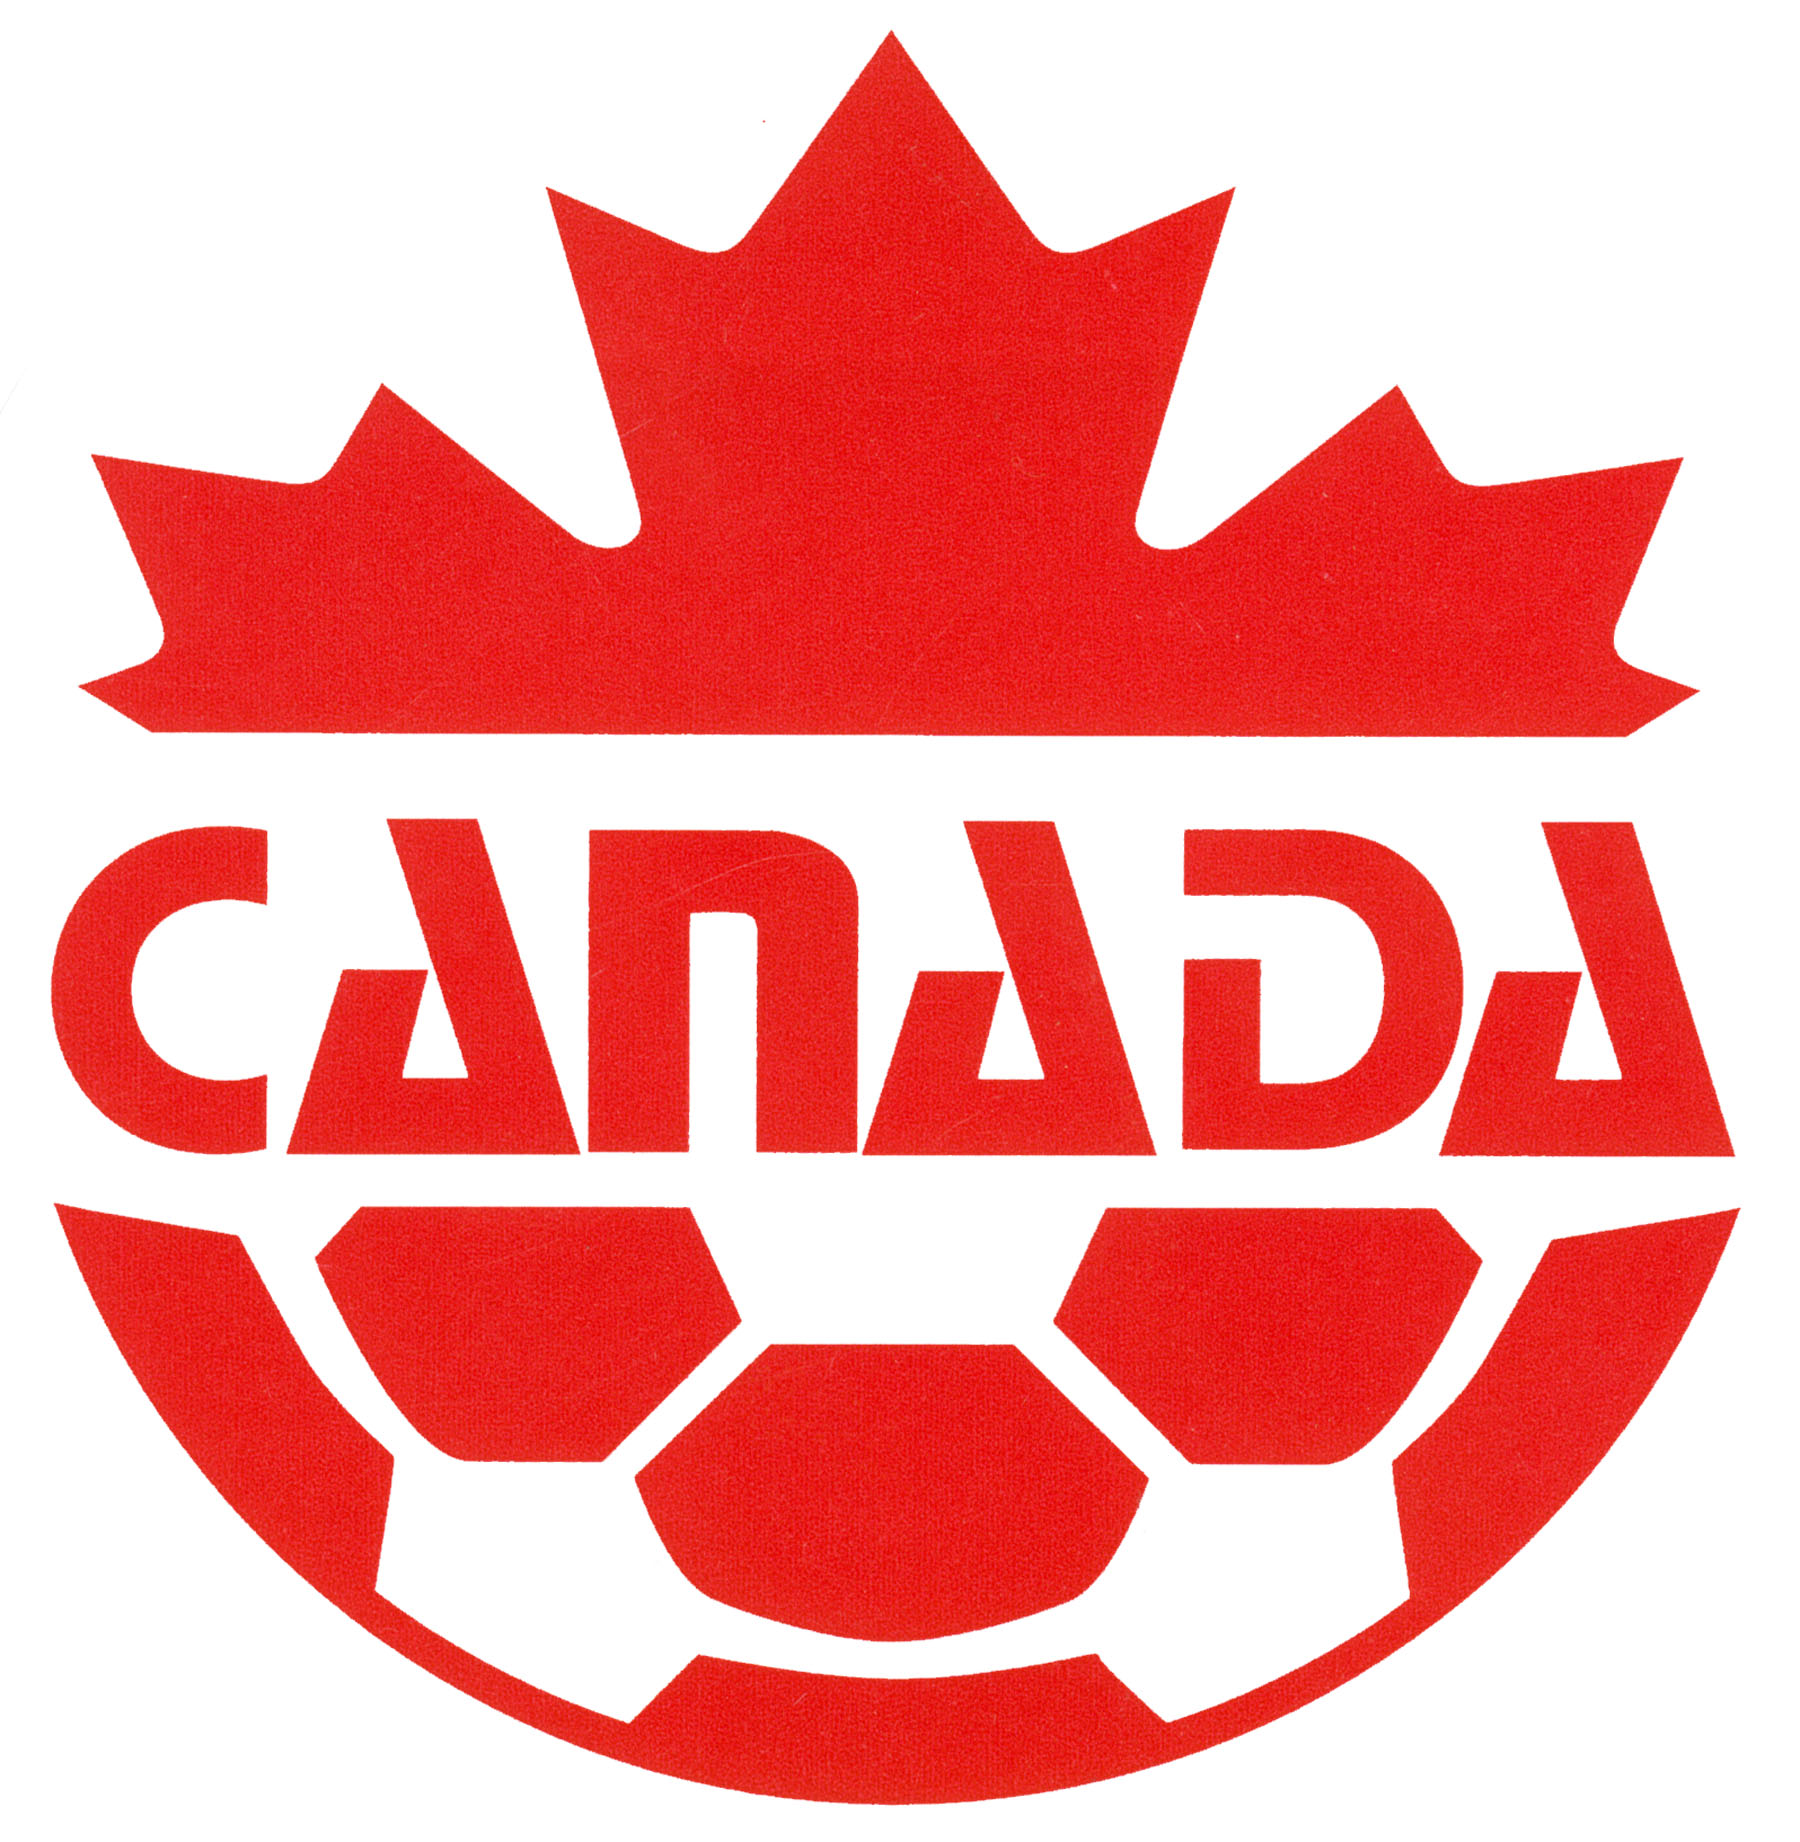 Top Scorer of the Canadian Soccer League (1987-1992)